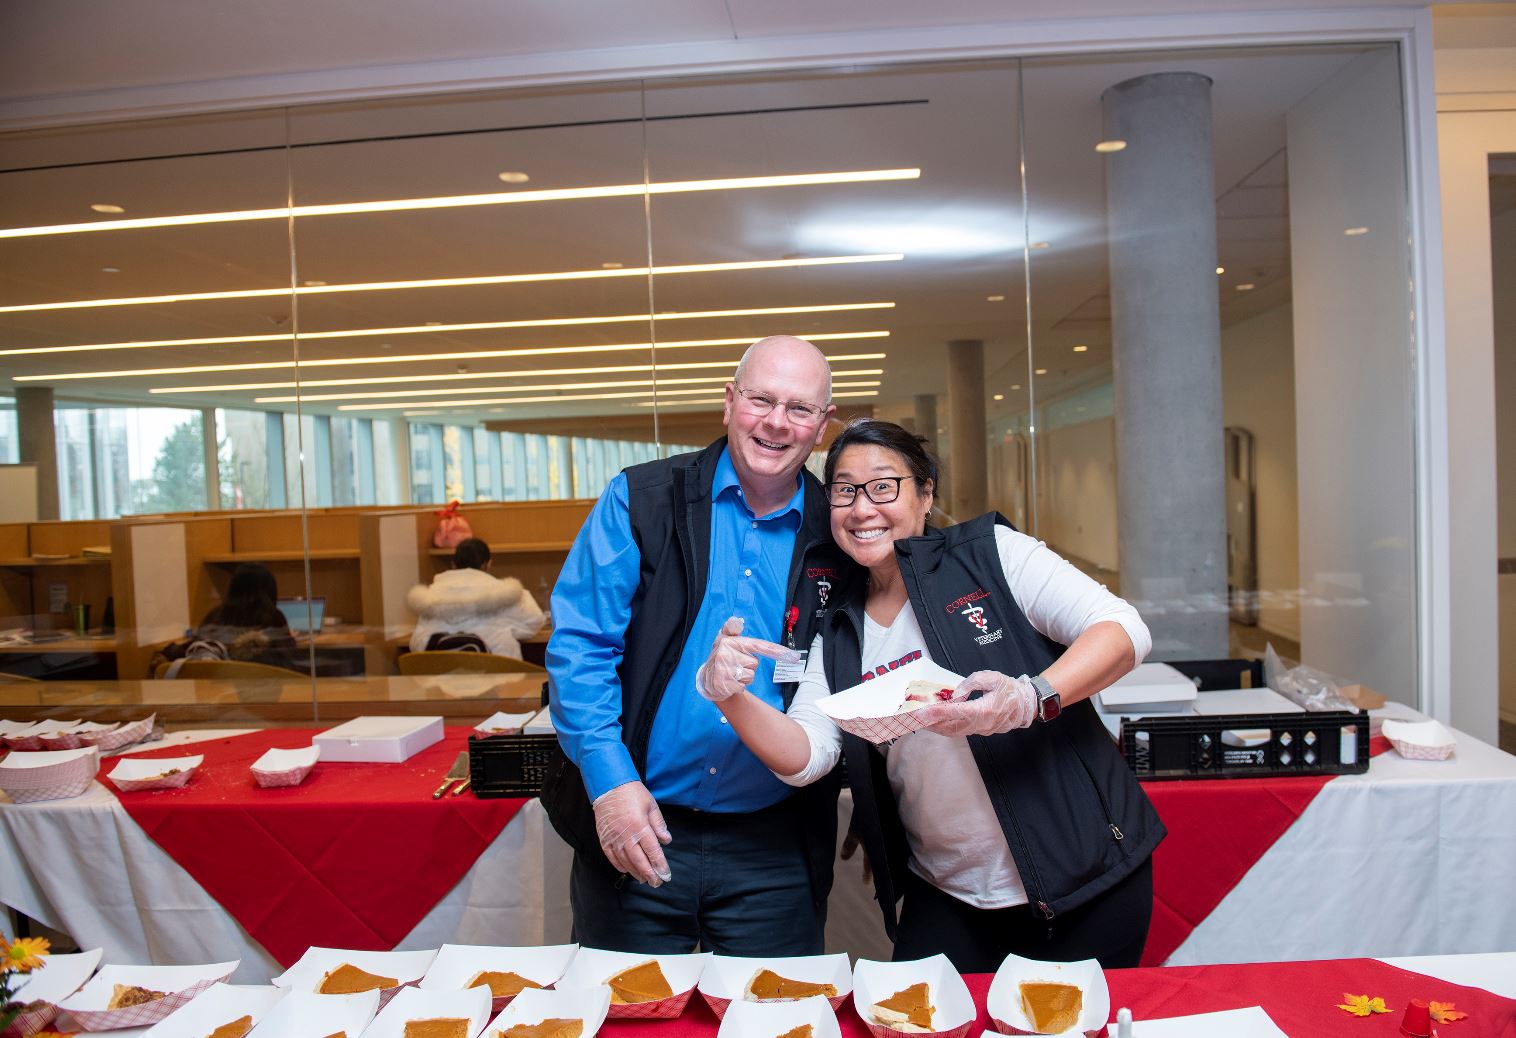 Bob Wakeman and Carolyn Chow of CVM HR serve pie at a CVM event